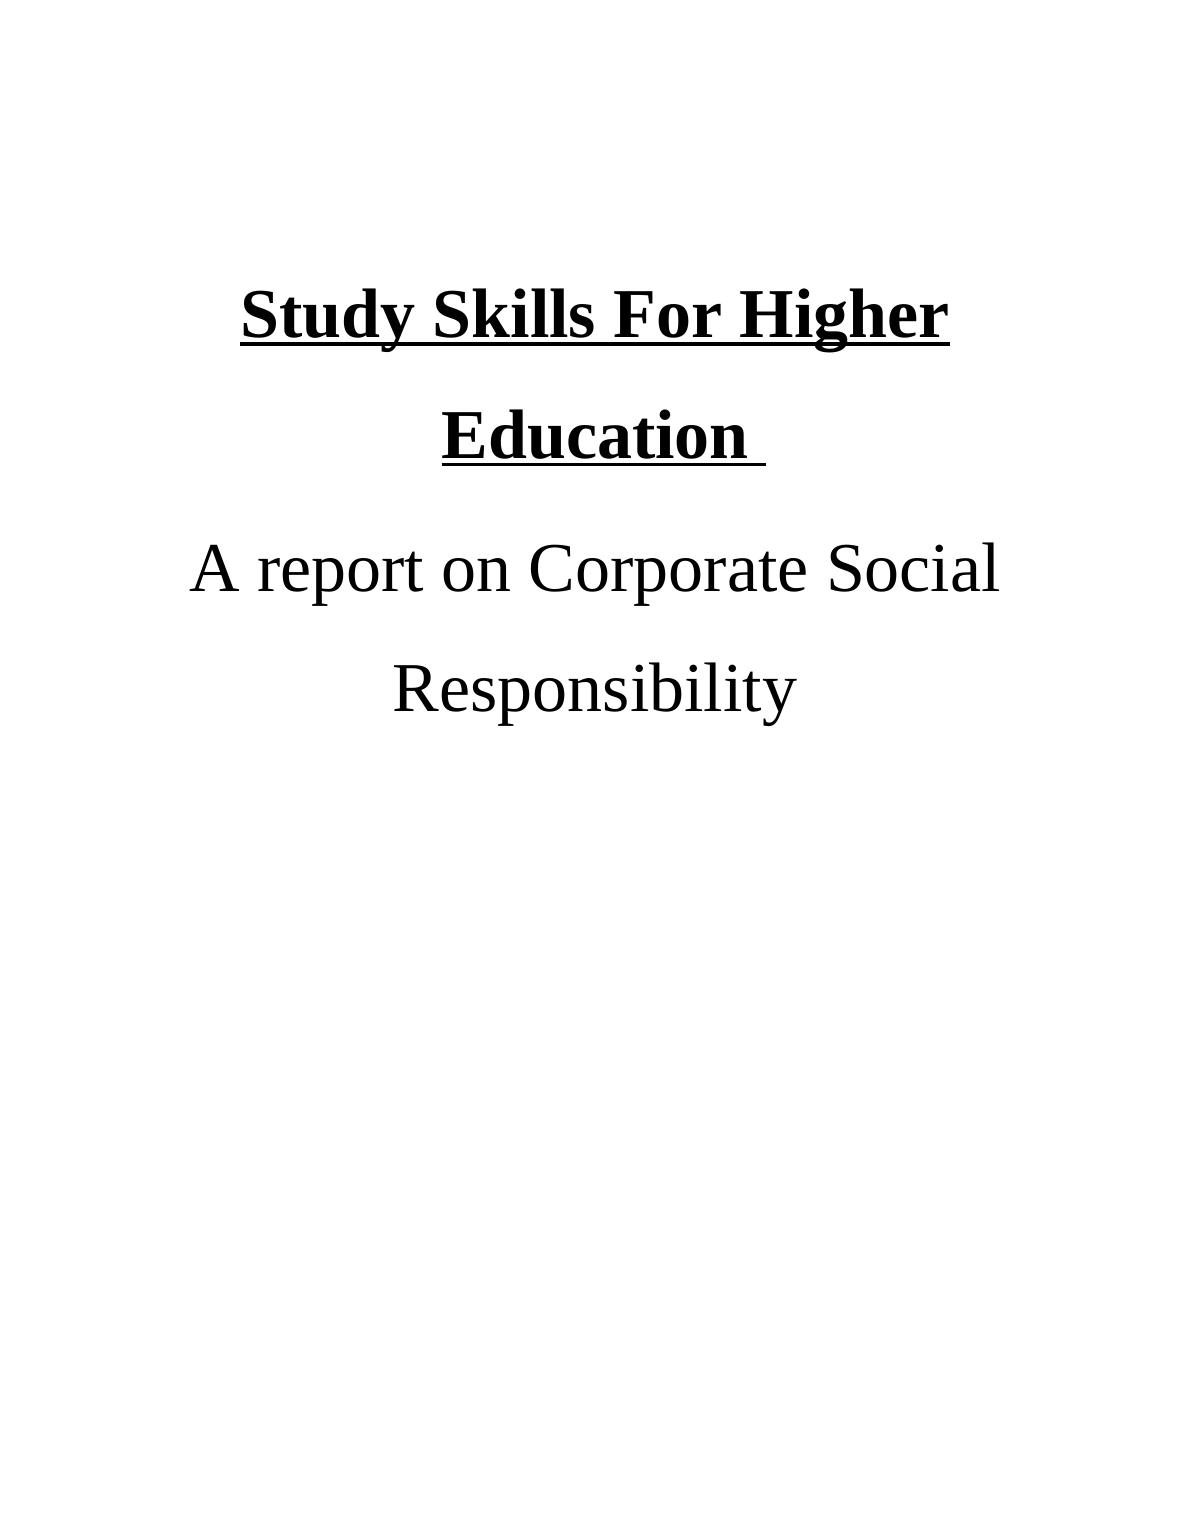 Literature Review on Corporate Social Responsibility - Doc_1